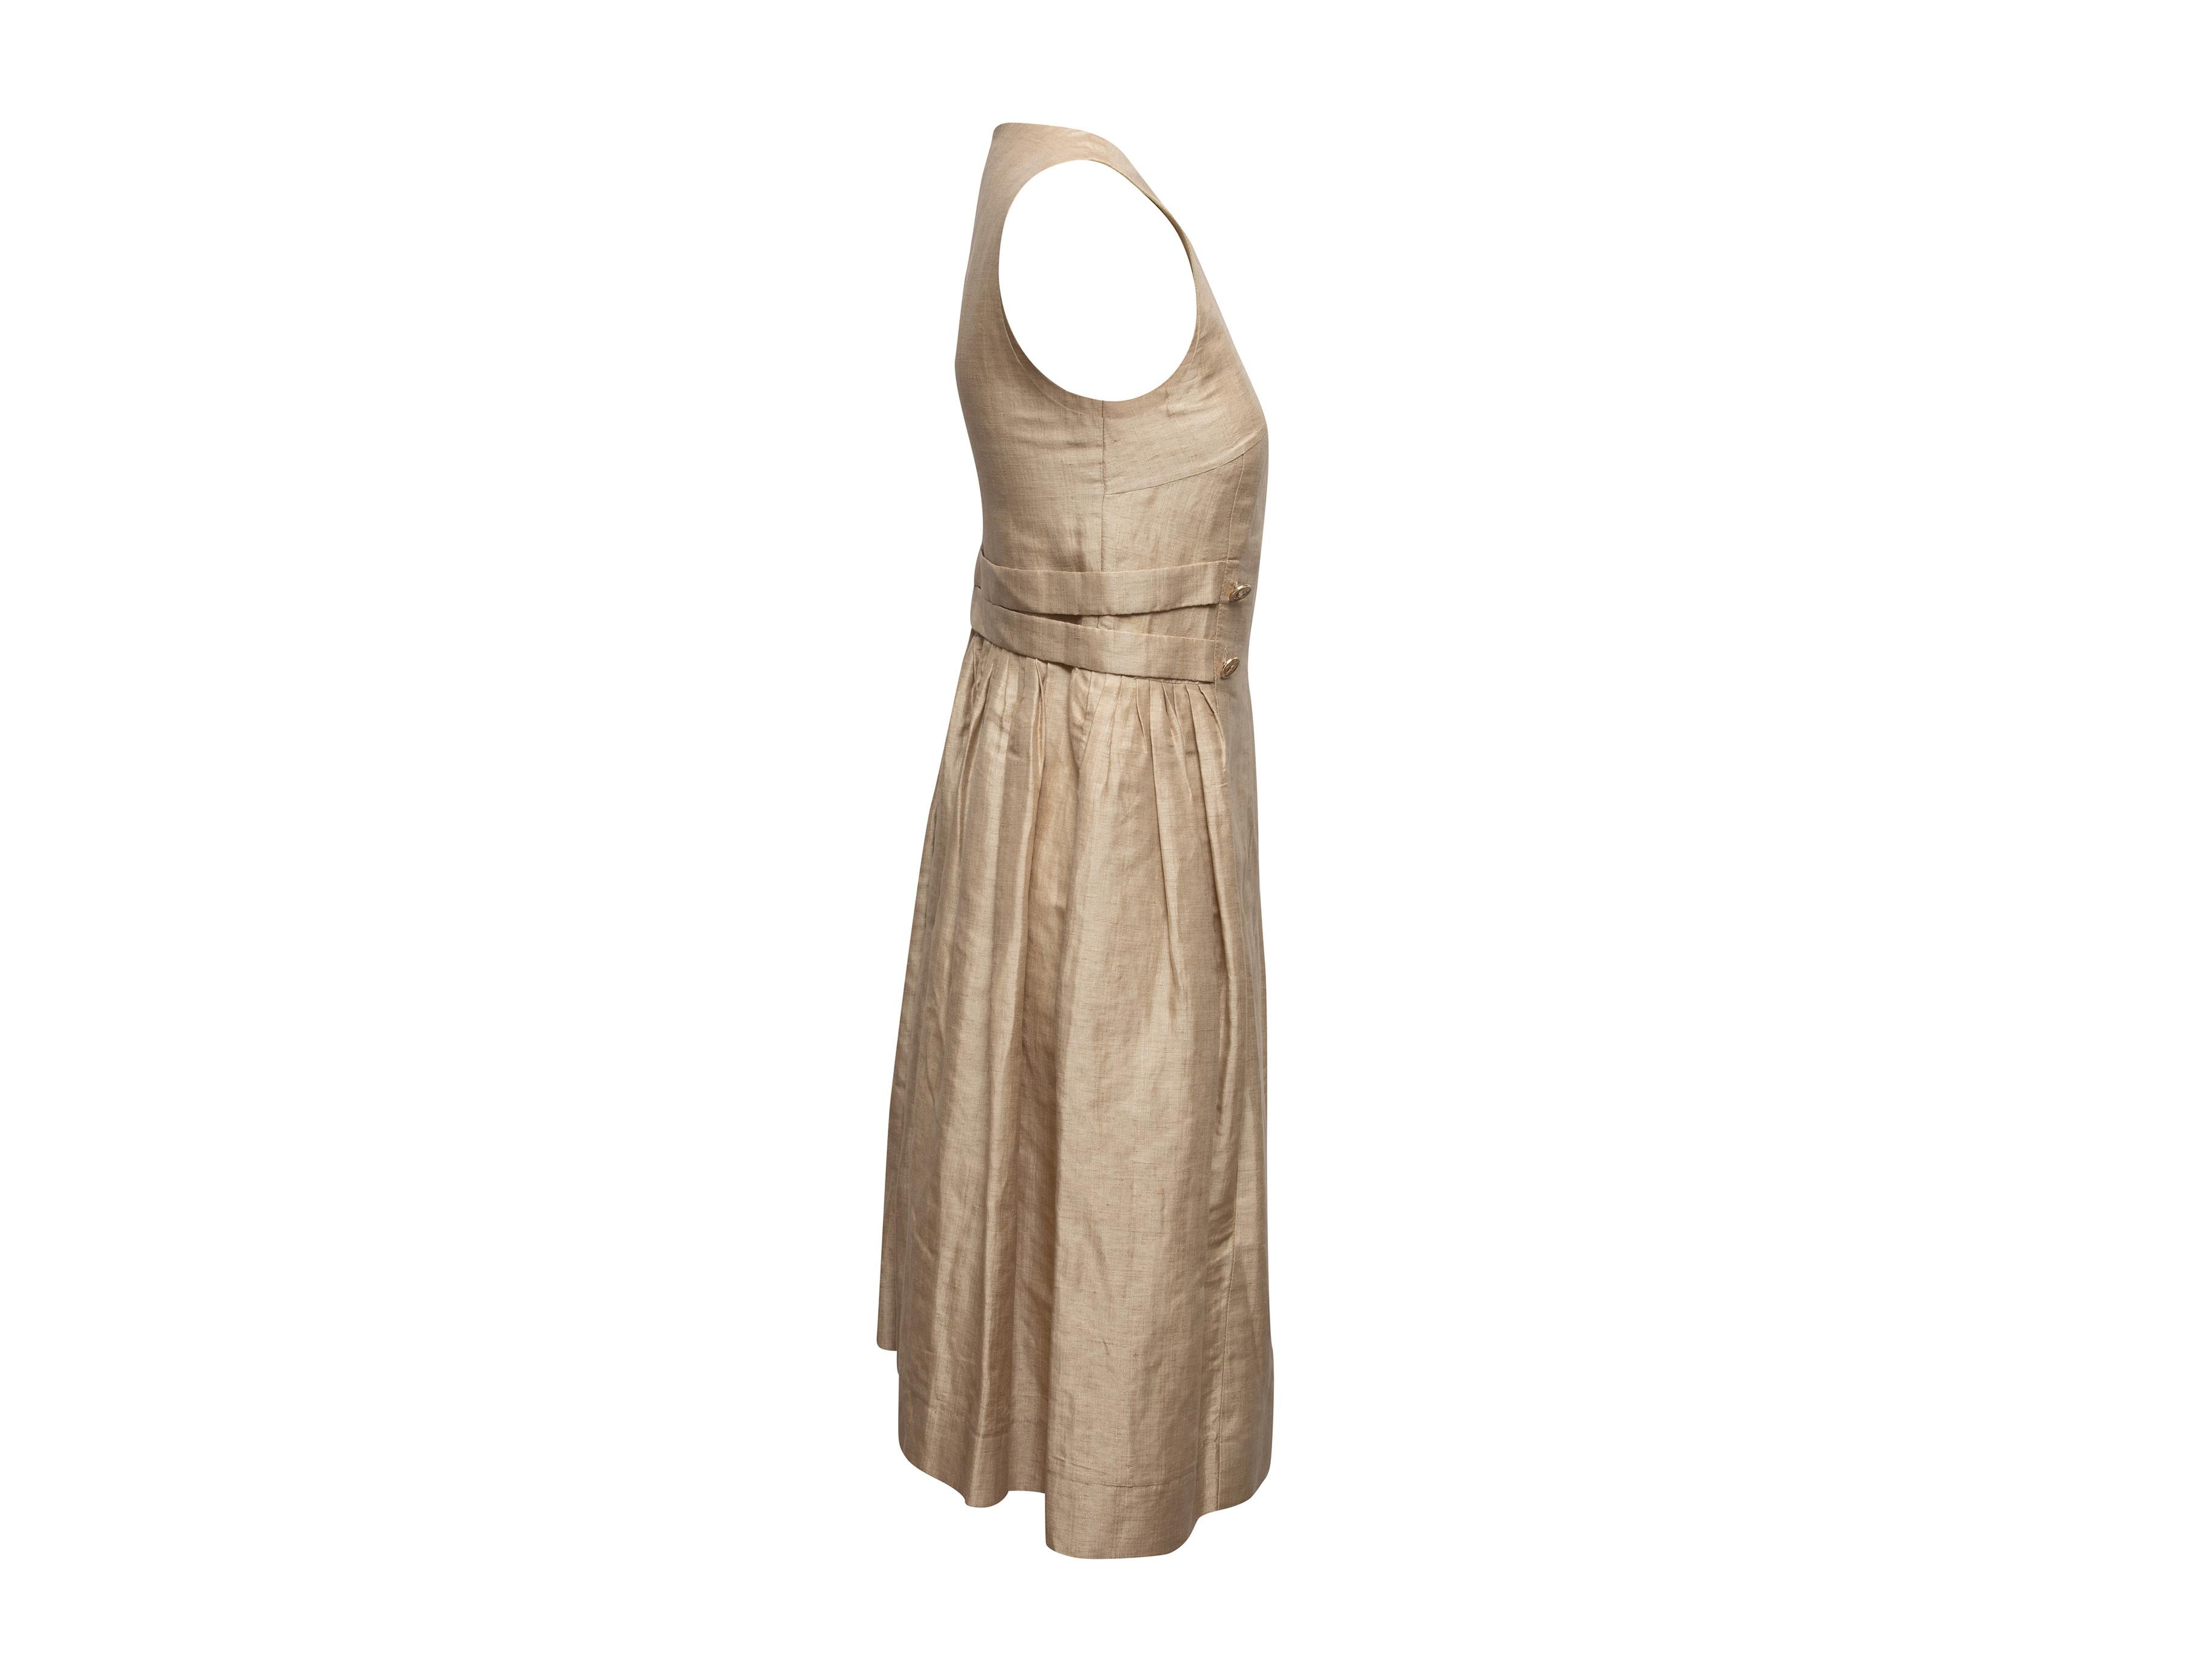  Beige linen sleeveless midi dress by Chanel. Crew neck. Gold-tone button accents at sides. Zip closure at center back. 32